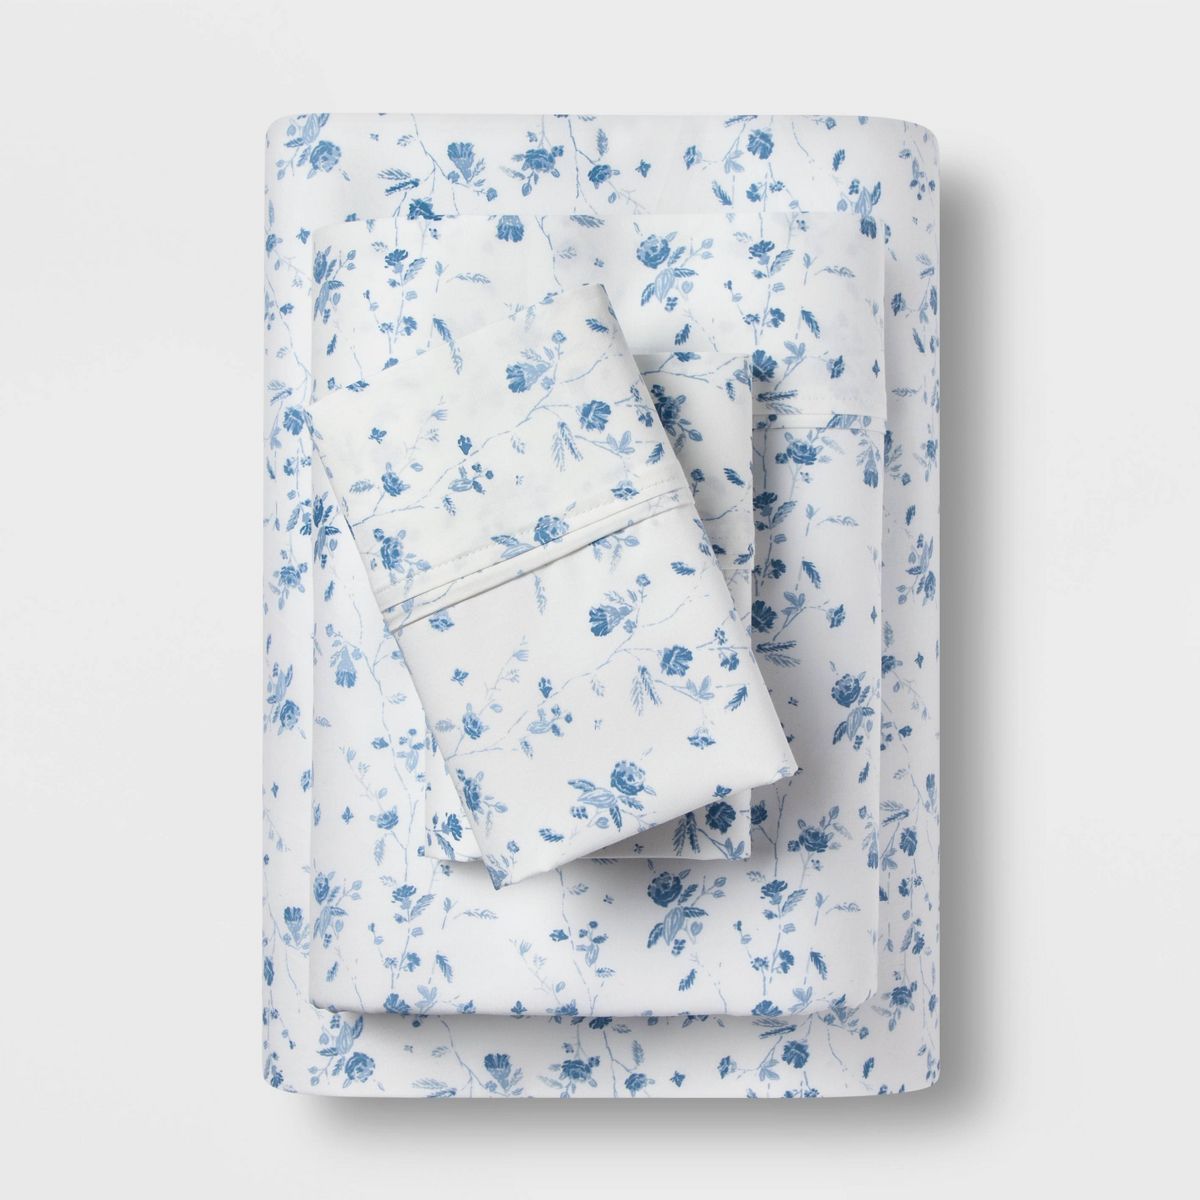 King 400 Thread Count Floral Print Cotton Performance Sheet Set White/Blue Floral - Threshold™ | Target